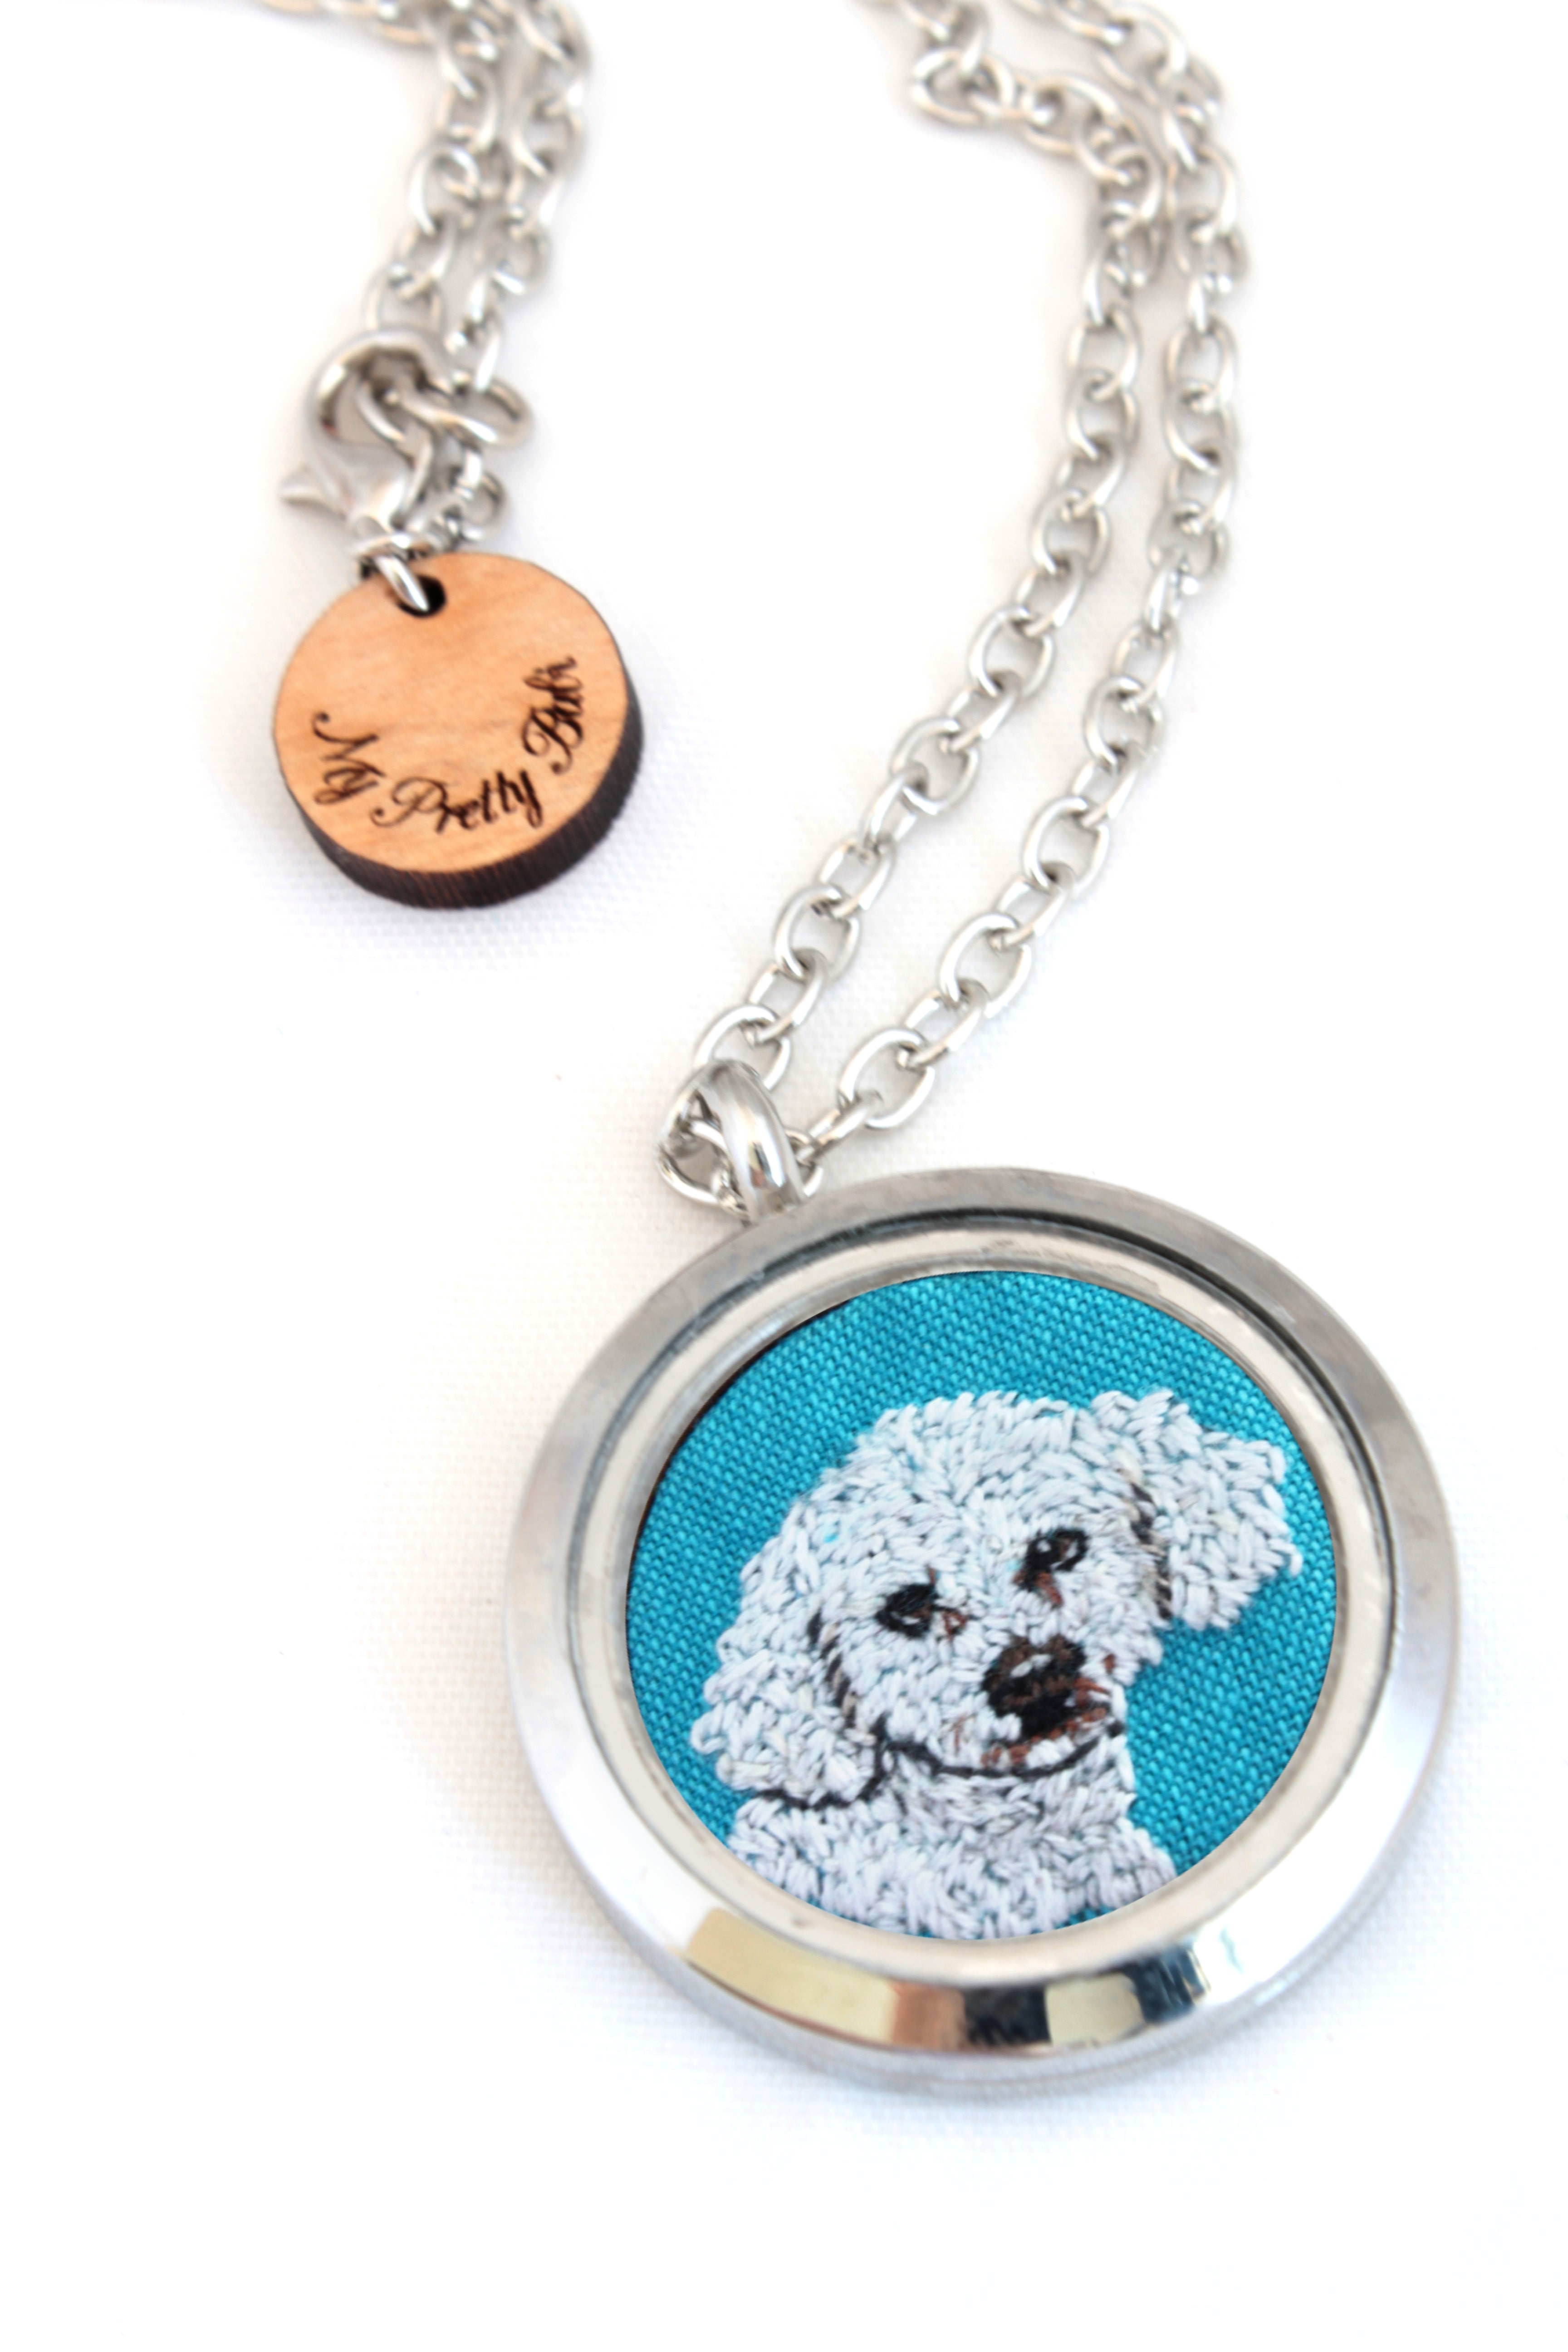 Personalized Pet Photo Necklace for Dogs with Engraving